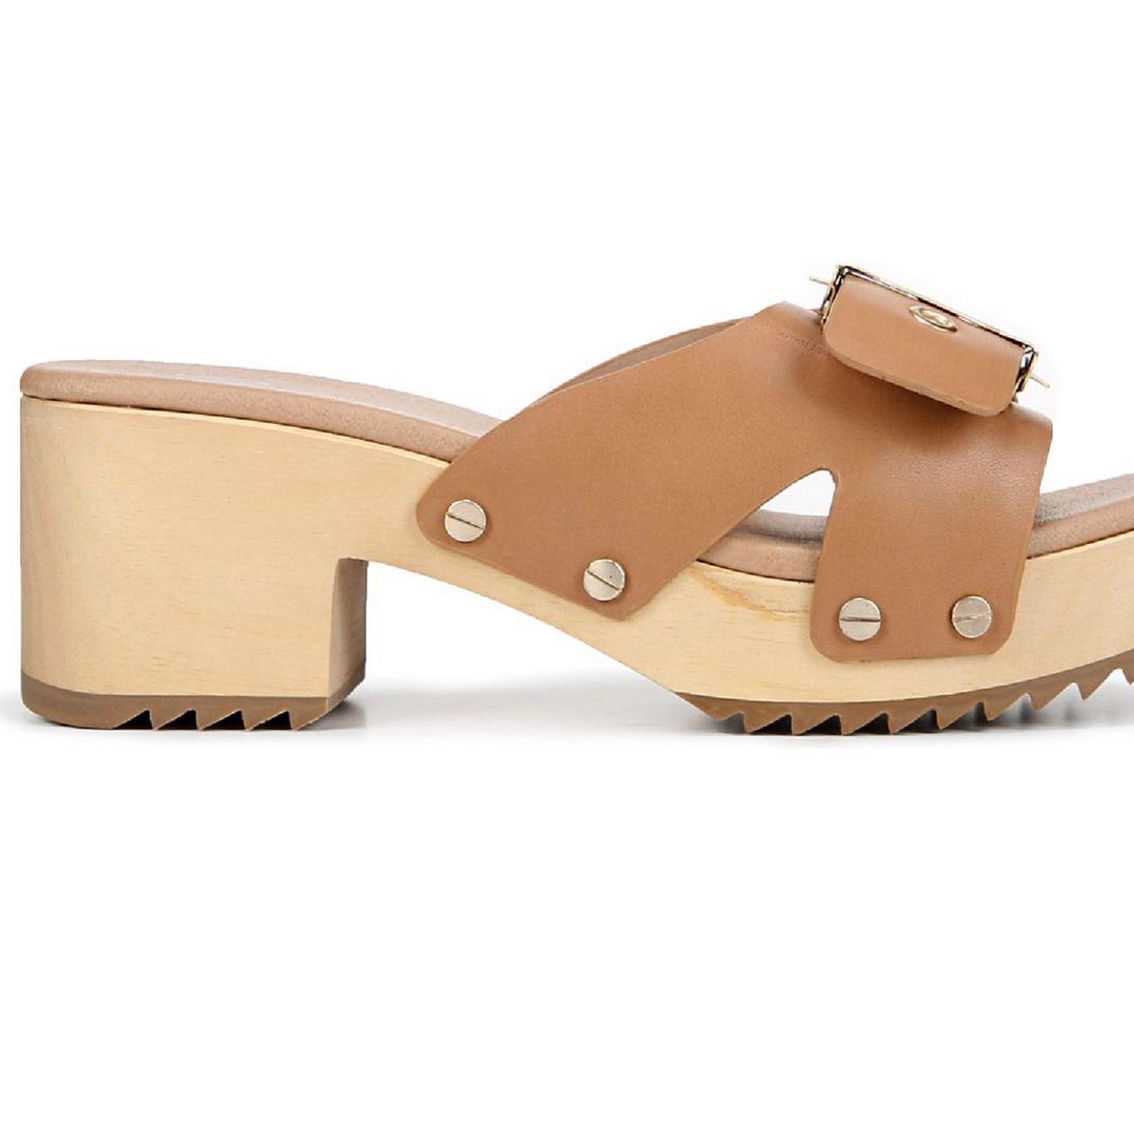 Womens Leather Slides Mule Sandals - Image 2 of 3